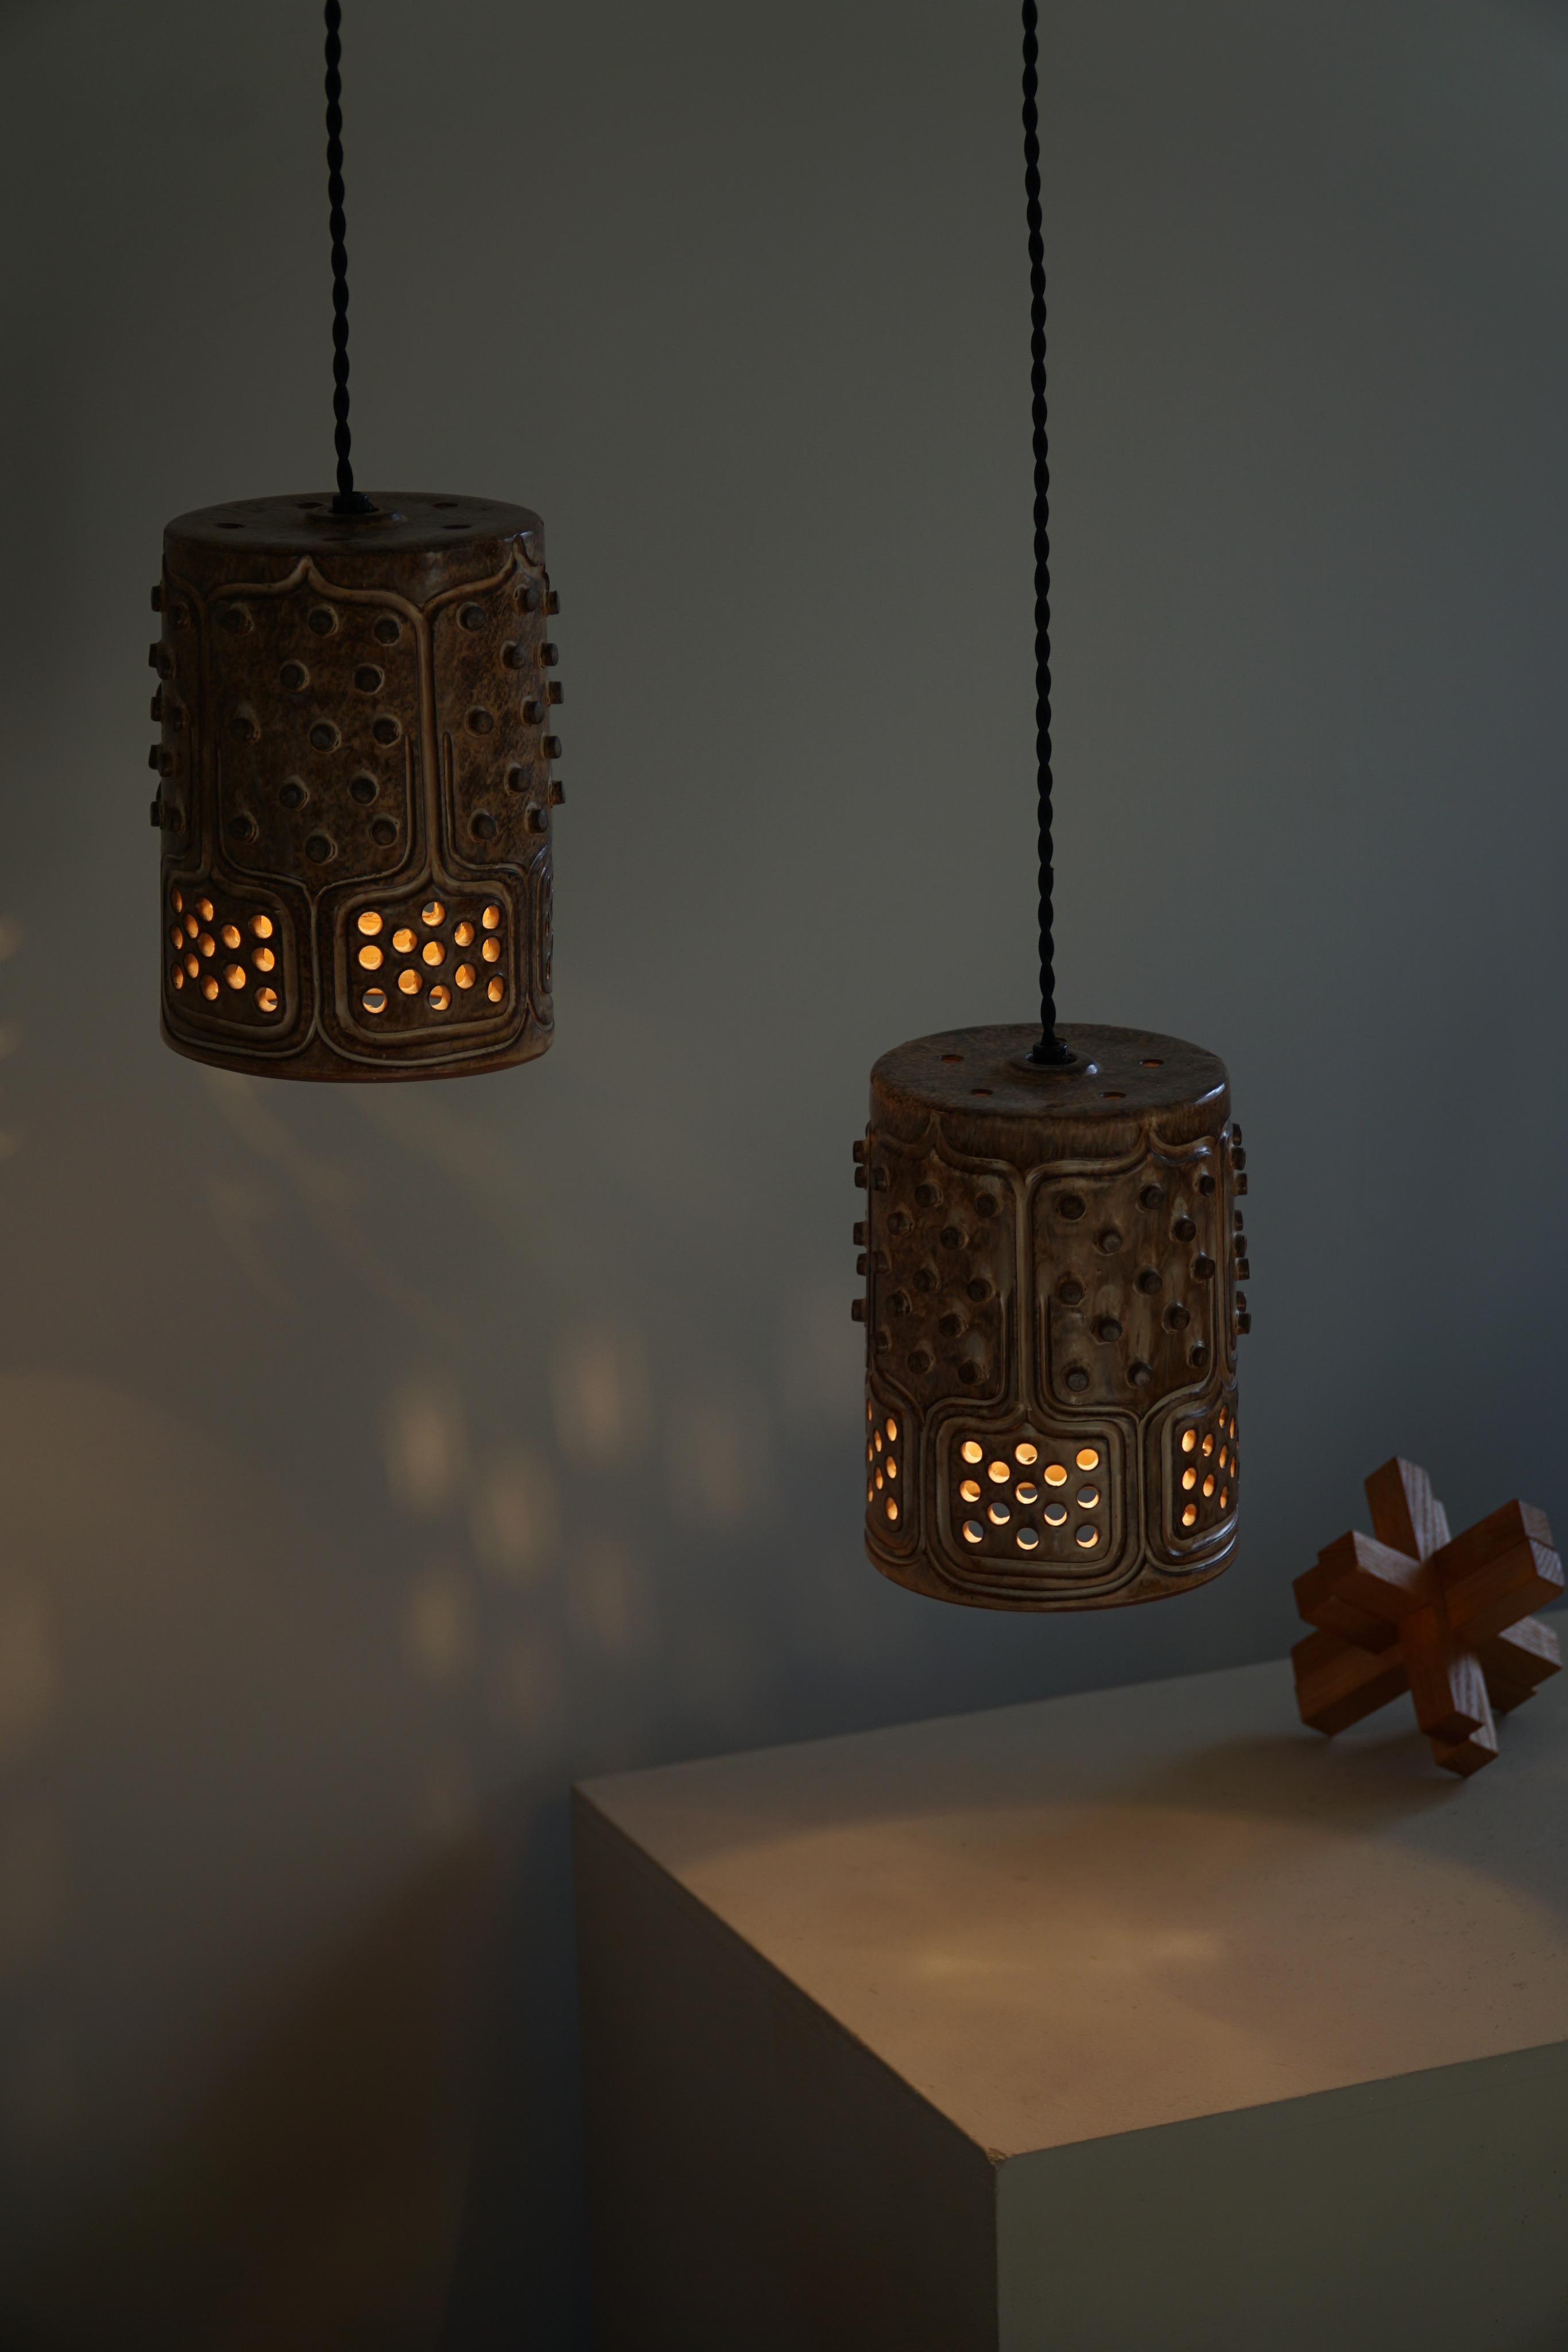 A pair of organic shaped cylinder pendant lamps in a good vintage condition. The lamp is handcrafted which makes the different shapes unique. The experimental shape and color of the lamp makes it a great object for almost every home creating a pop